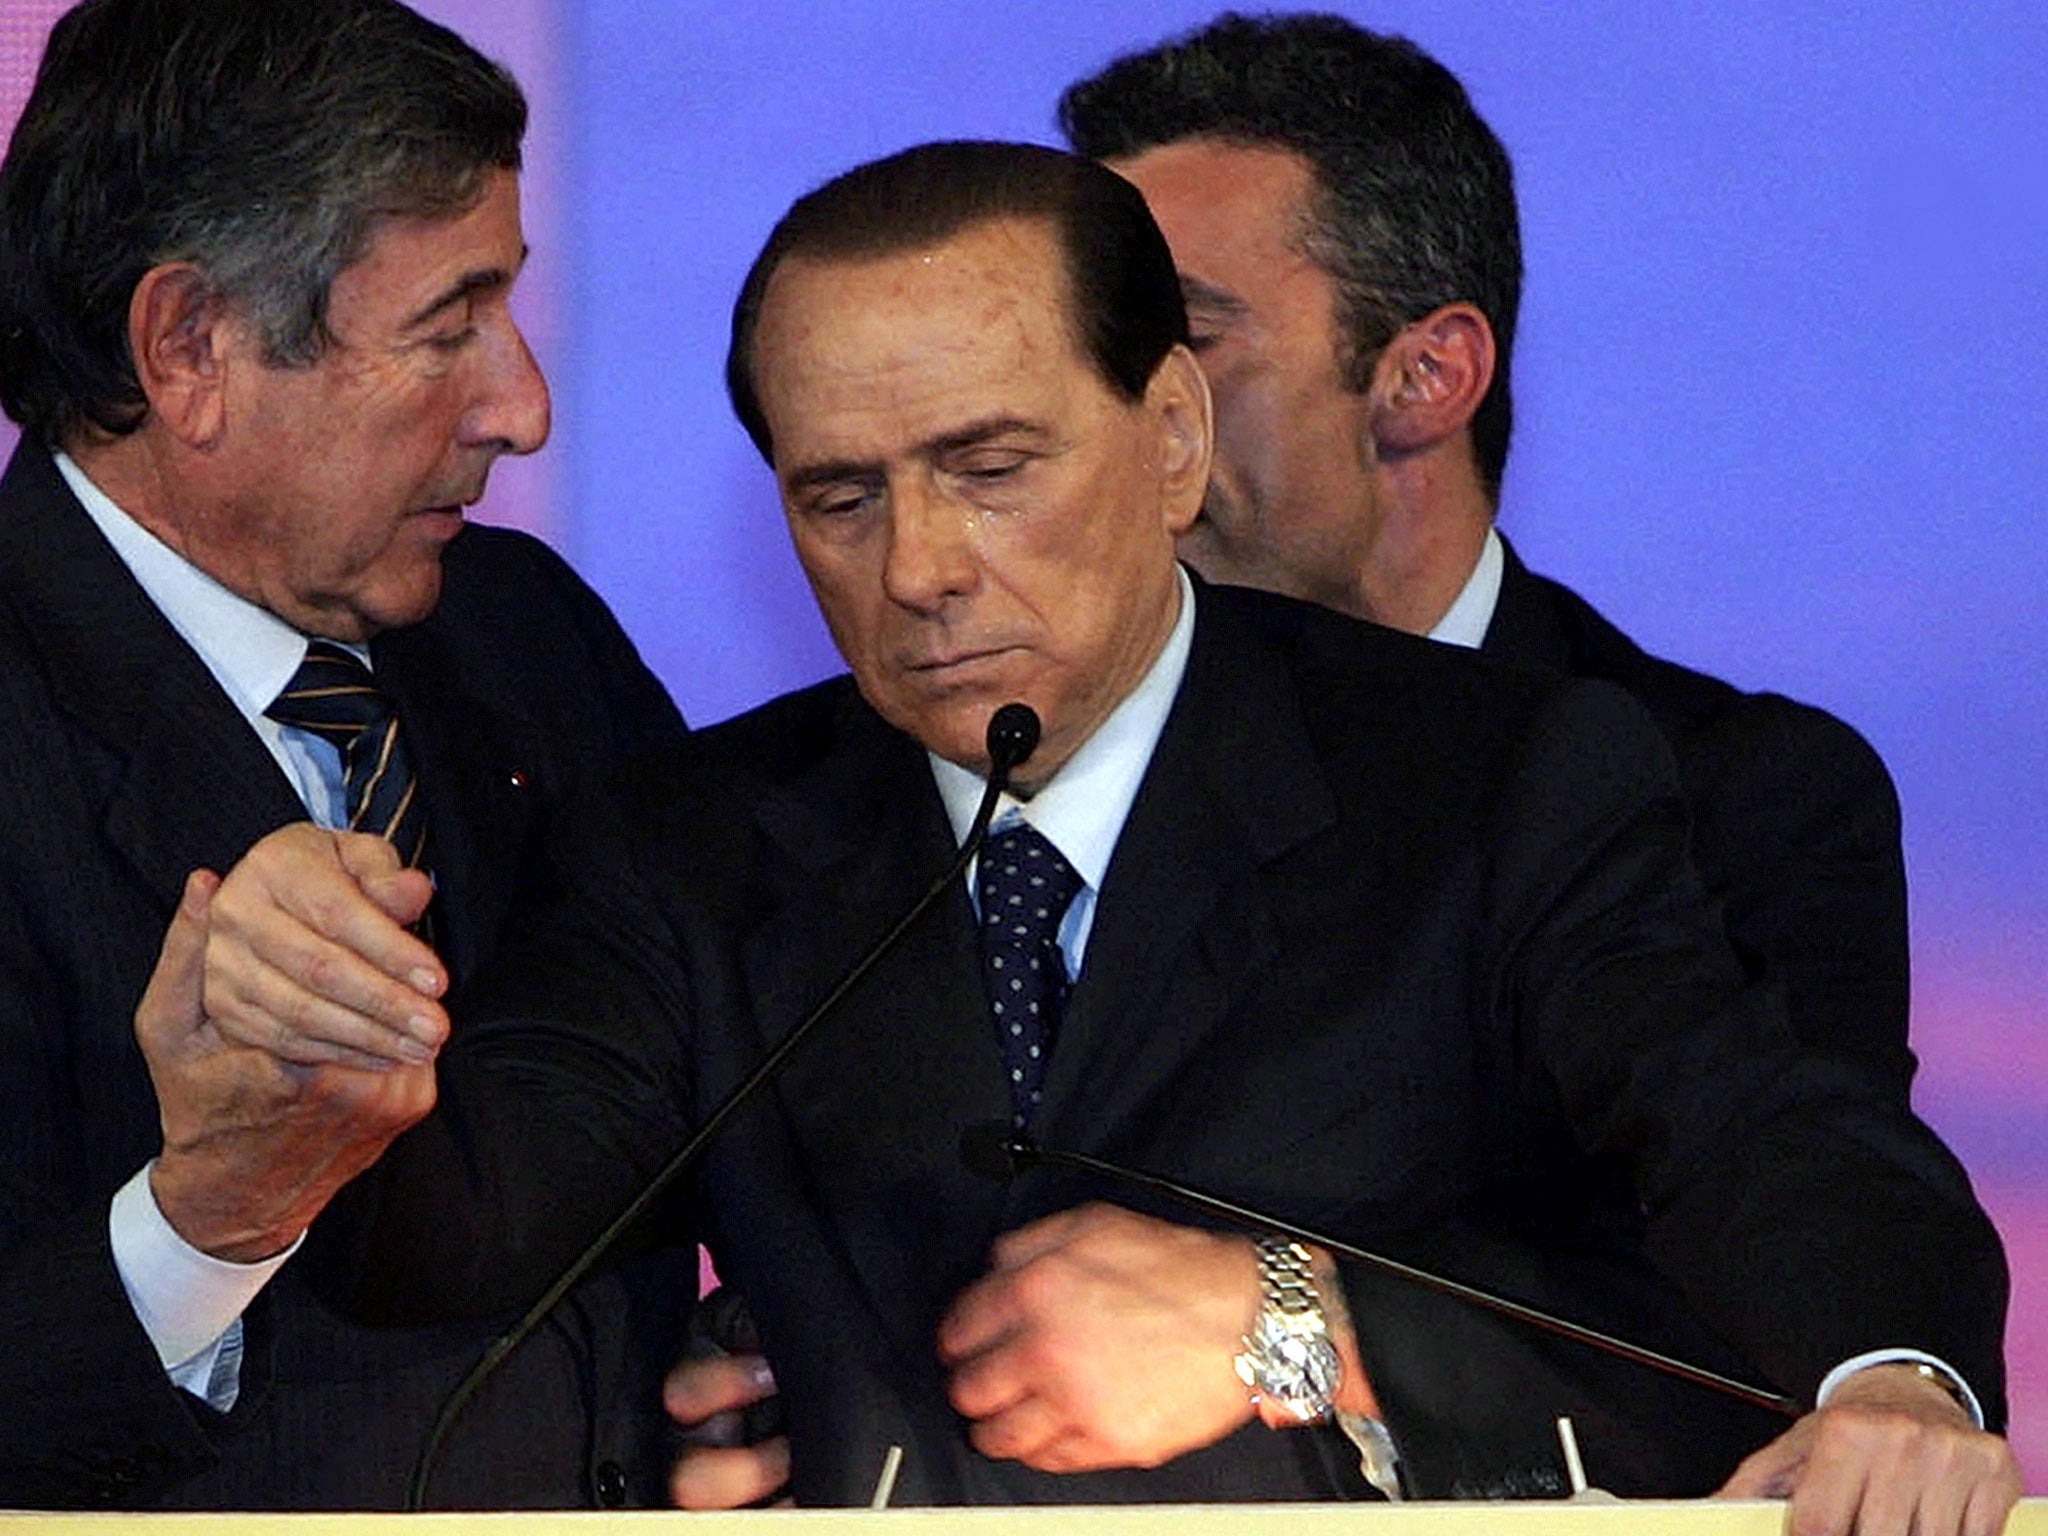 Former Italian premier Silvio Berlusconi, centre, is supported at the podium by his personal doctor Umberto Scapagnini, left